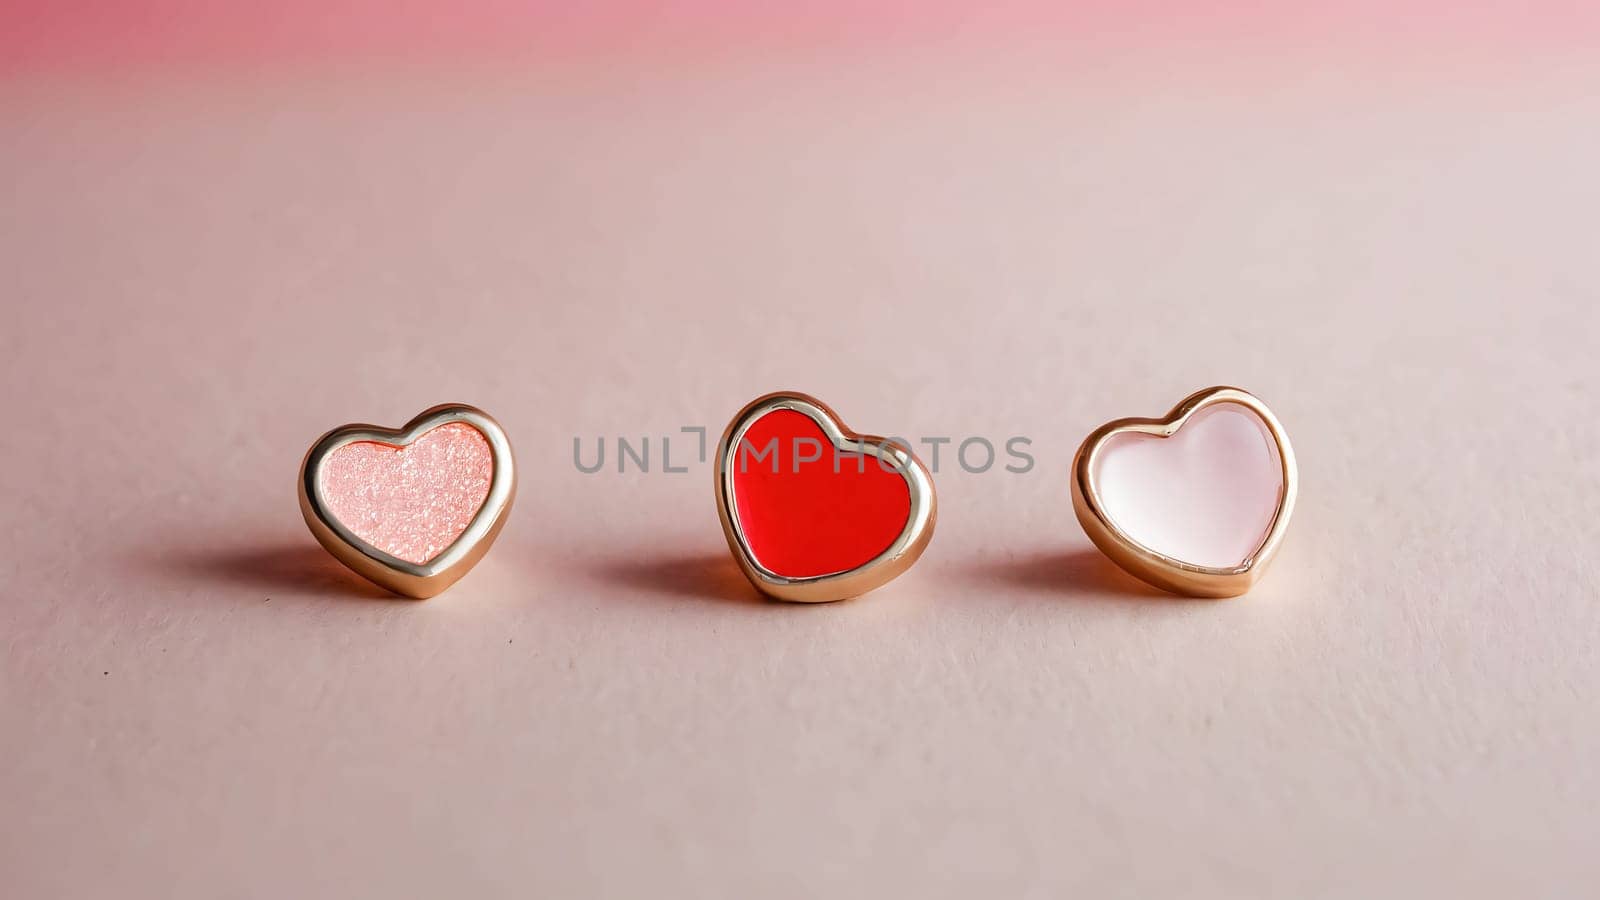 Shape of red hearts with pink background for card creation by antoksena